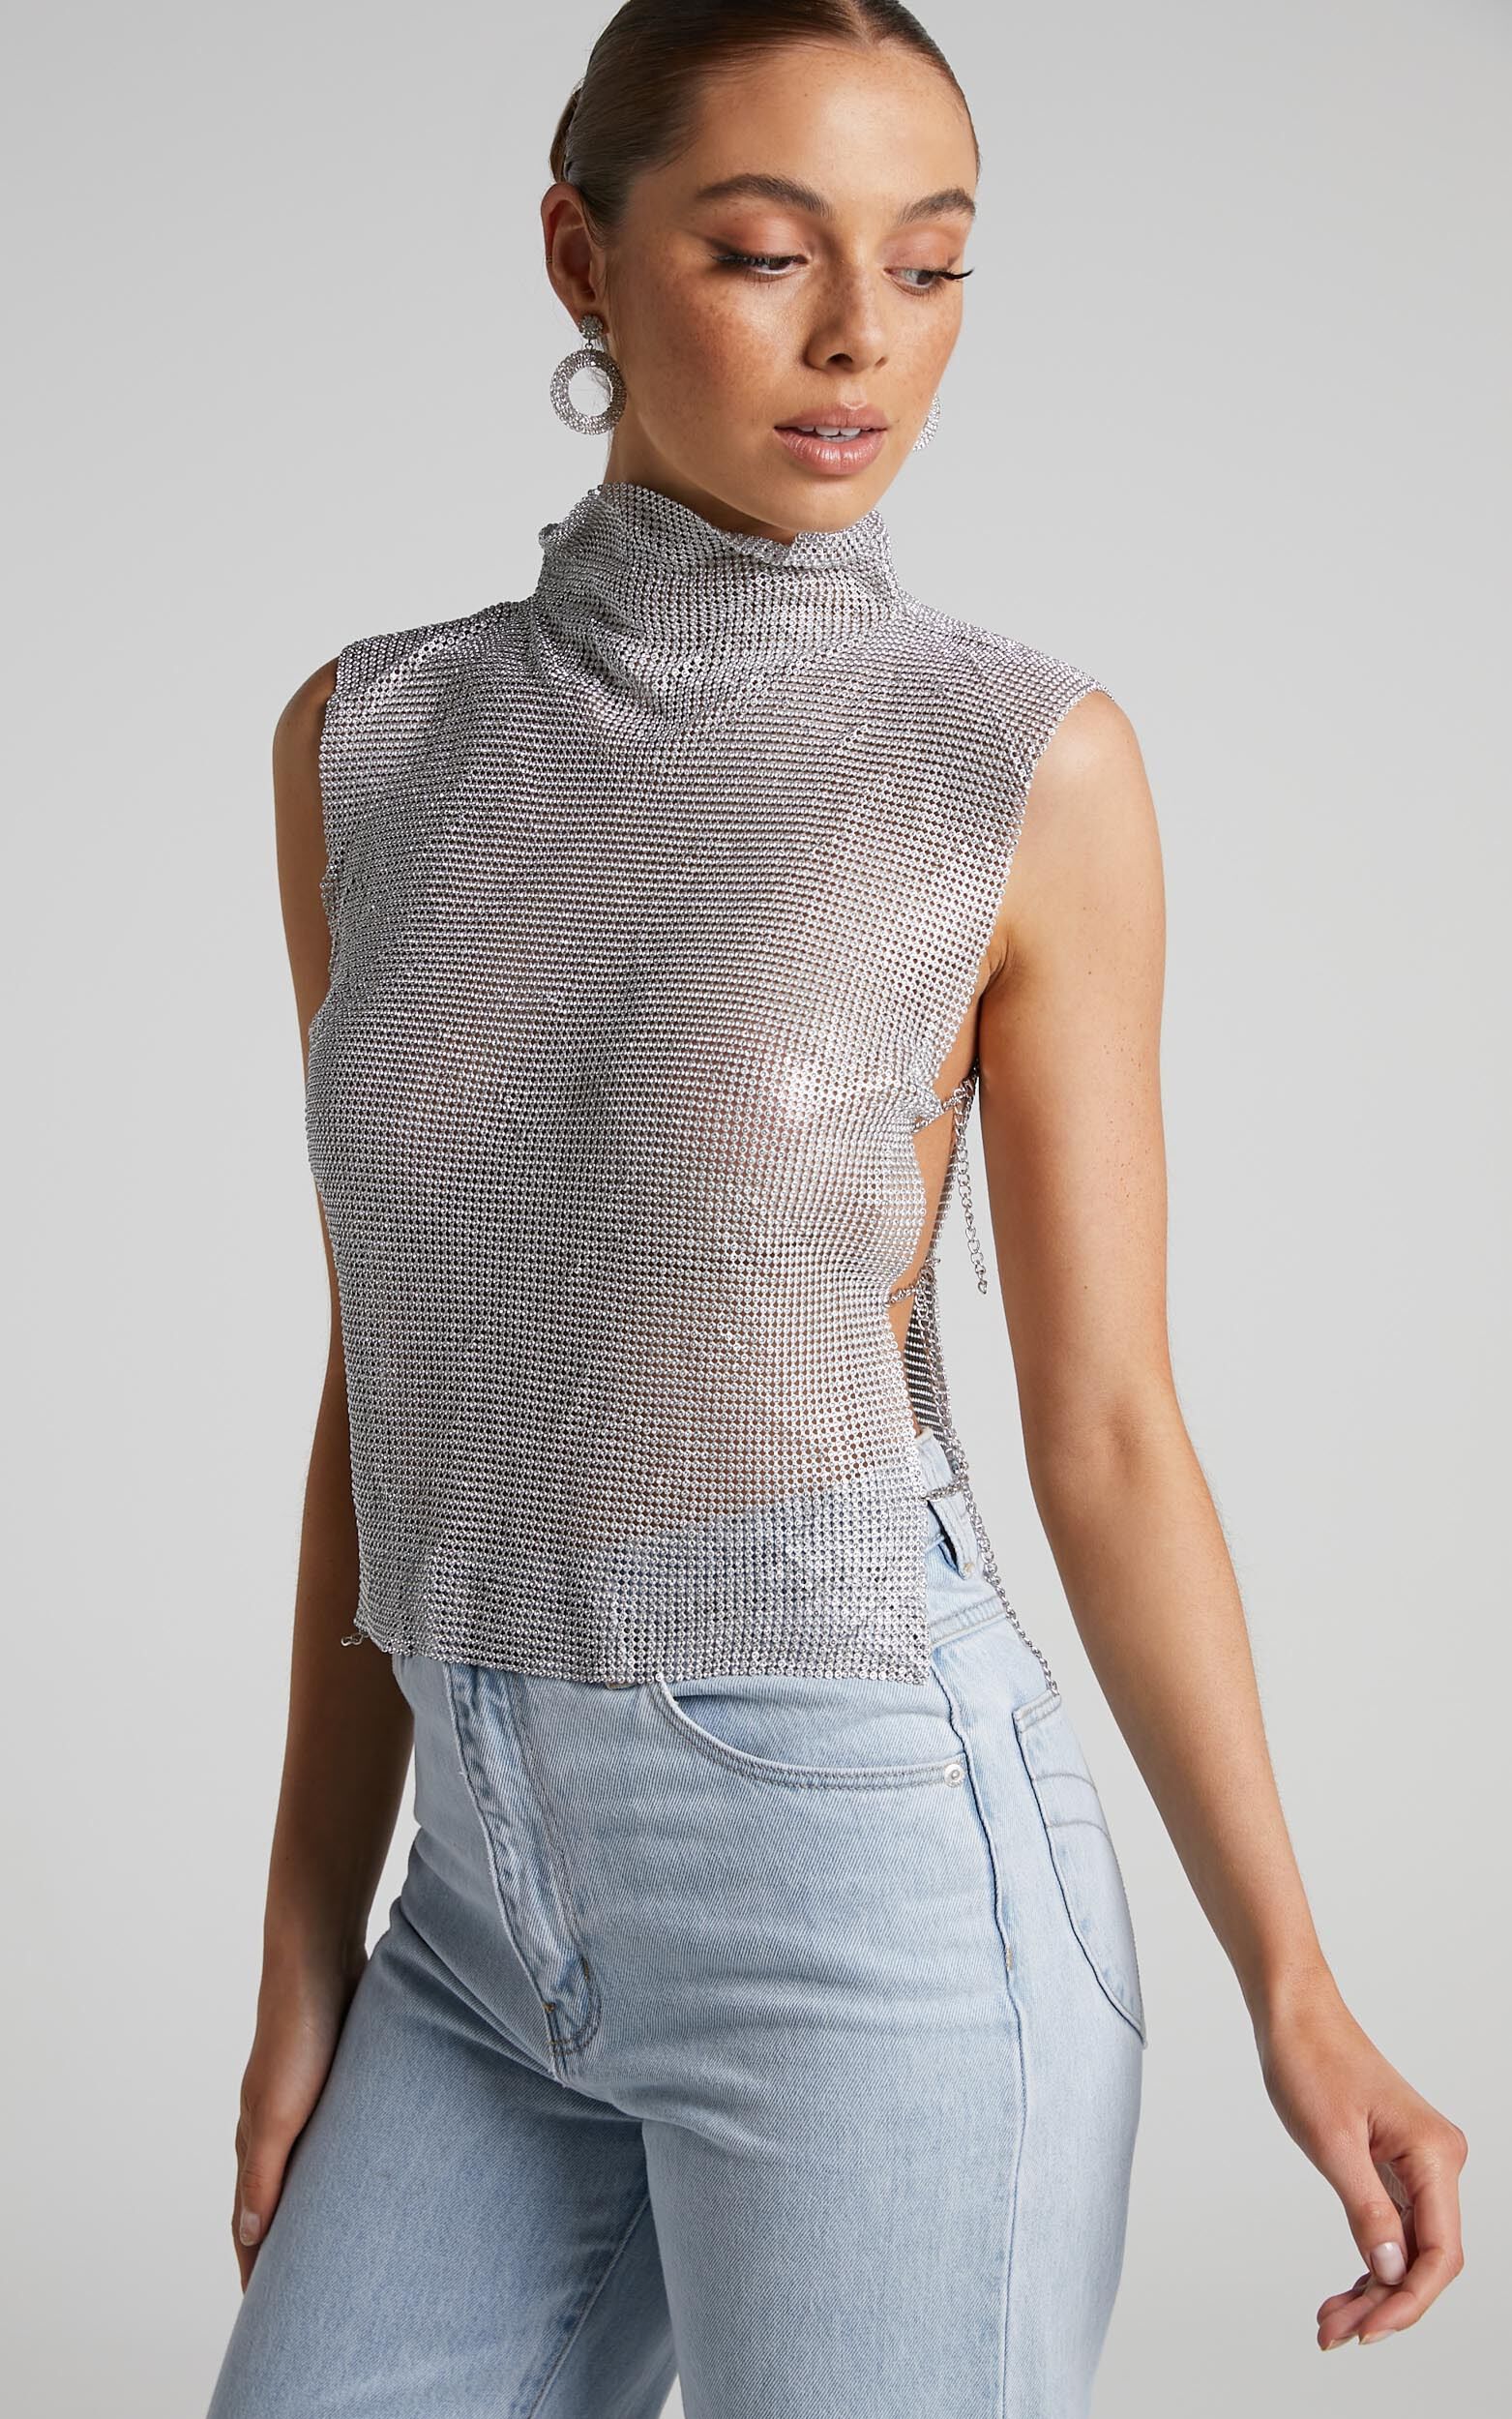 Dalena Top - Sleeveless High Neck Mesh Chainmail Top in Silver - L, SLV2, super-hi-res image number null